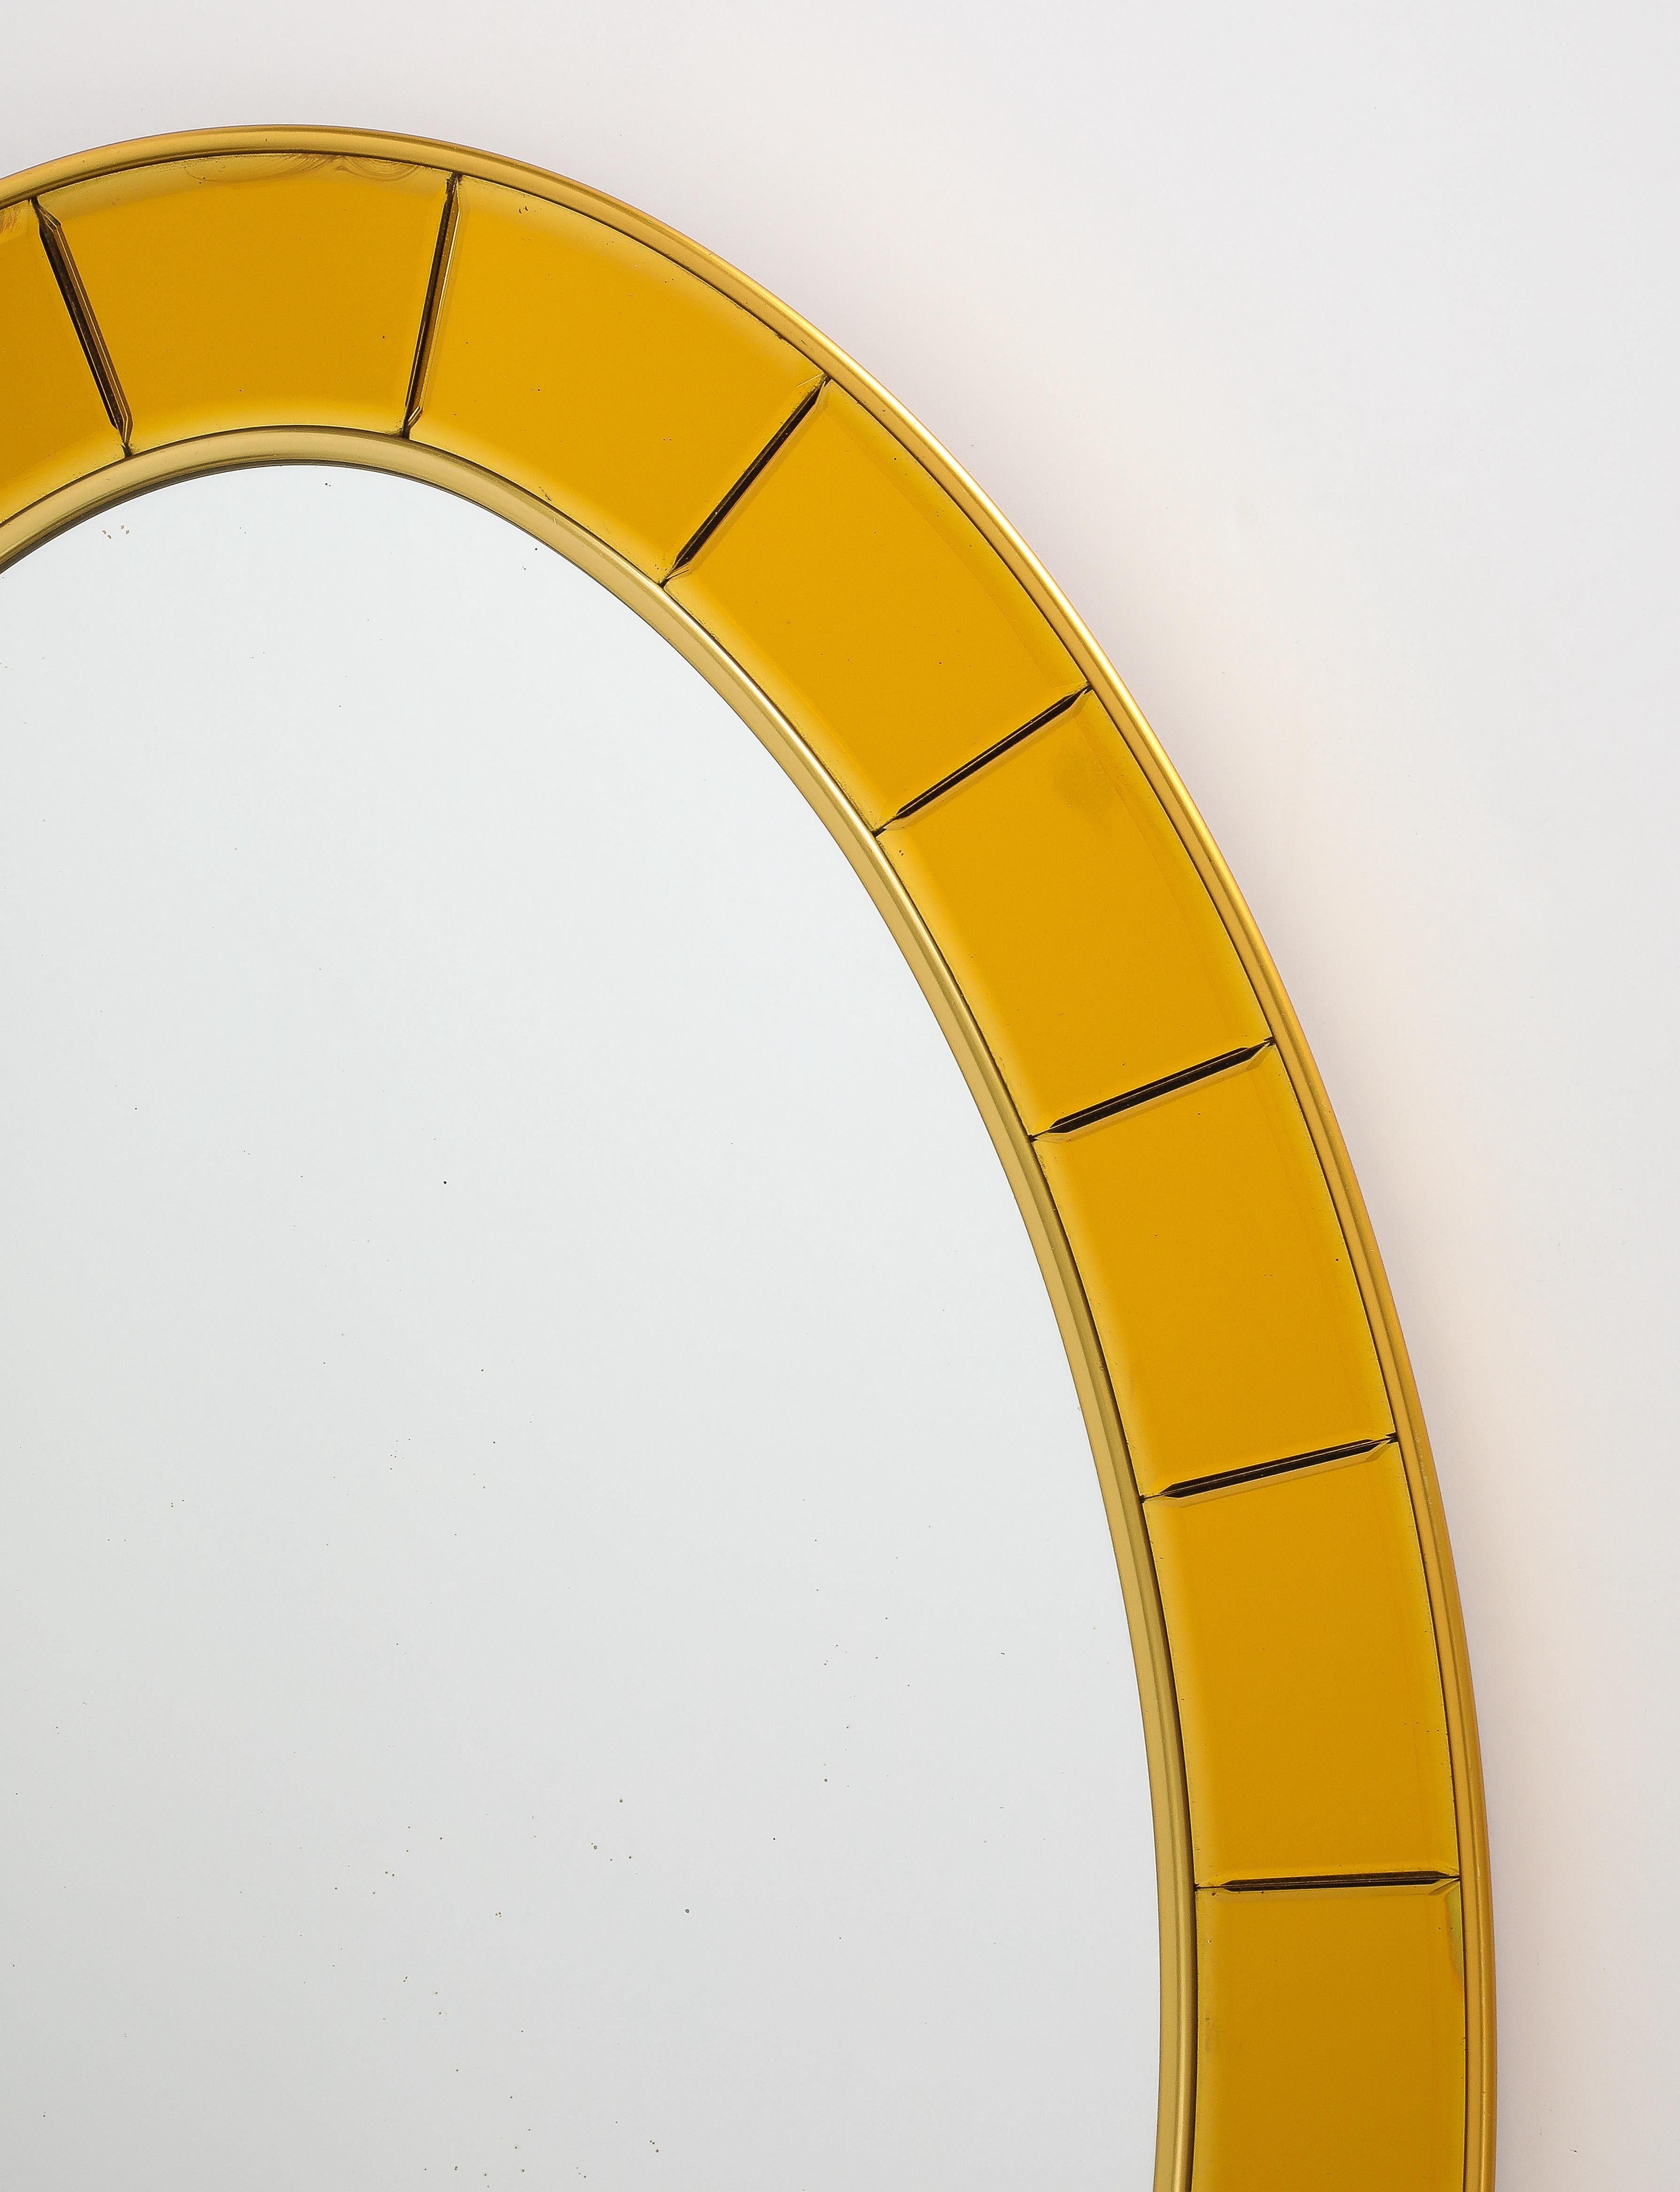 Cut Glass Cristal Art Oval Gold Hand-Cut Beveled Glass Mirror Model 2727, 1950s For Sale